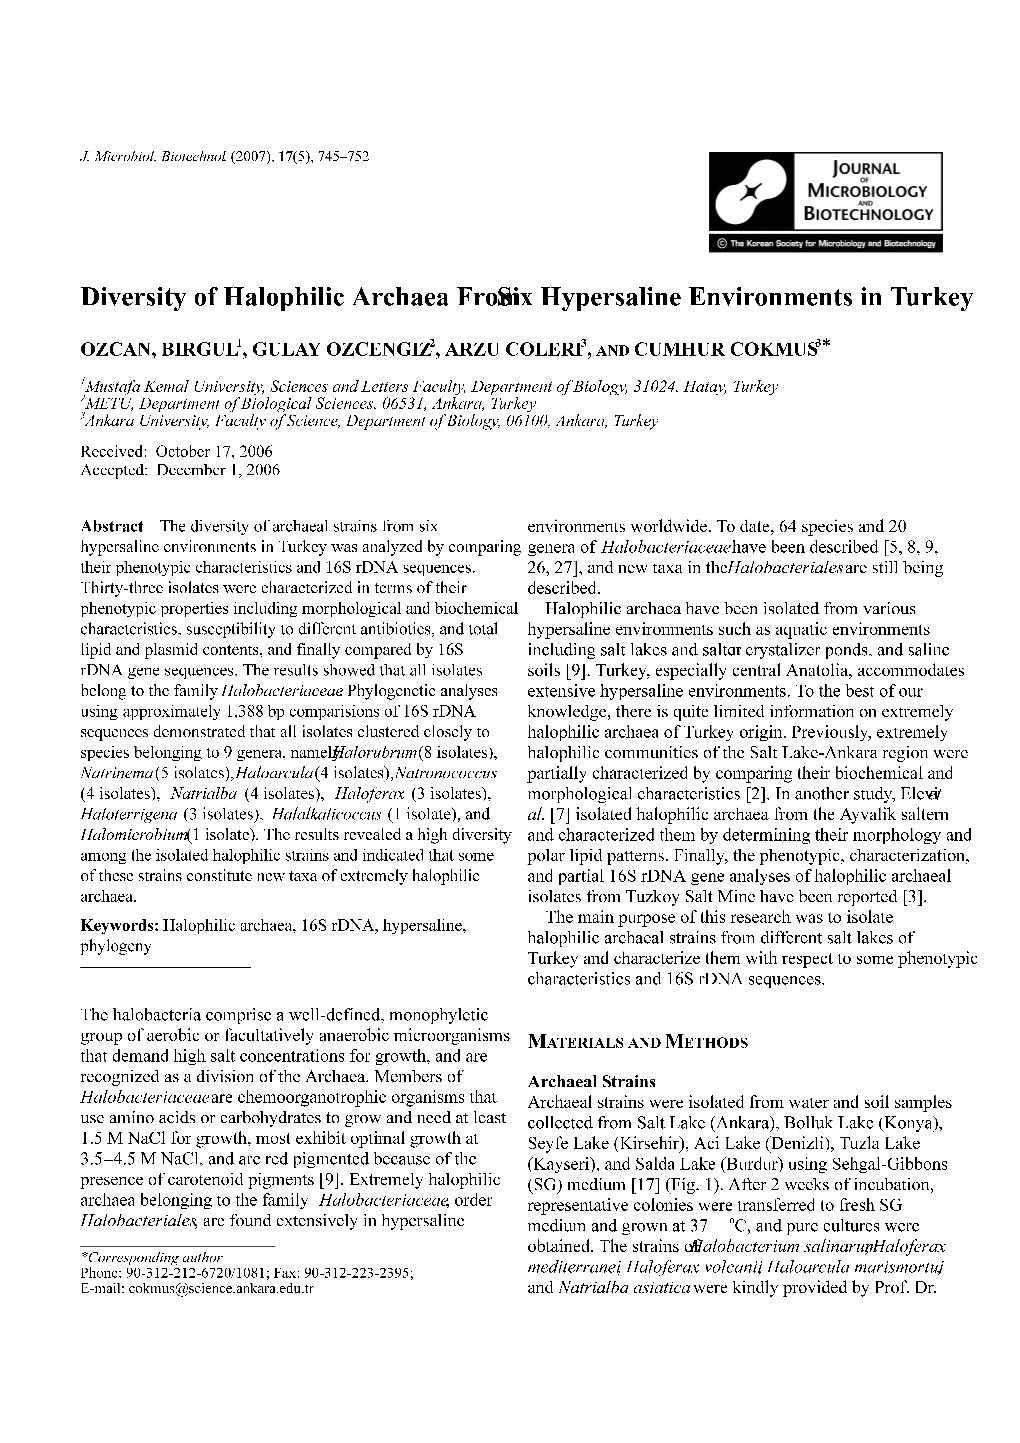 Diversity of Halophilic Archaea from Six Hypersaline Environments in Turkey